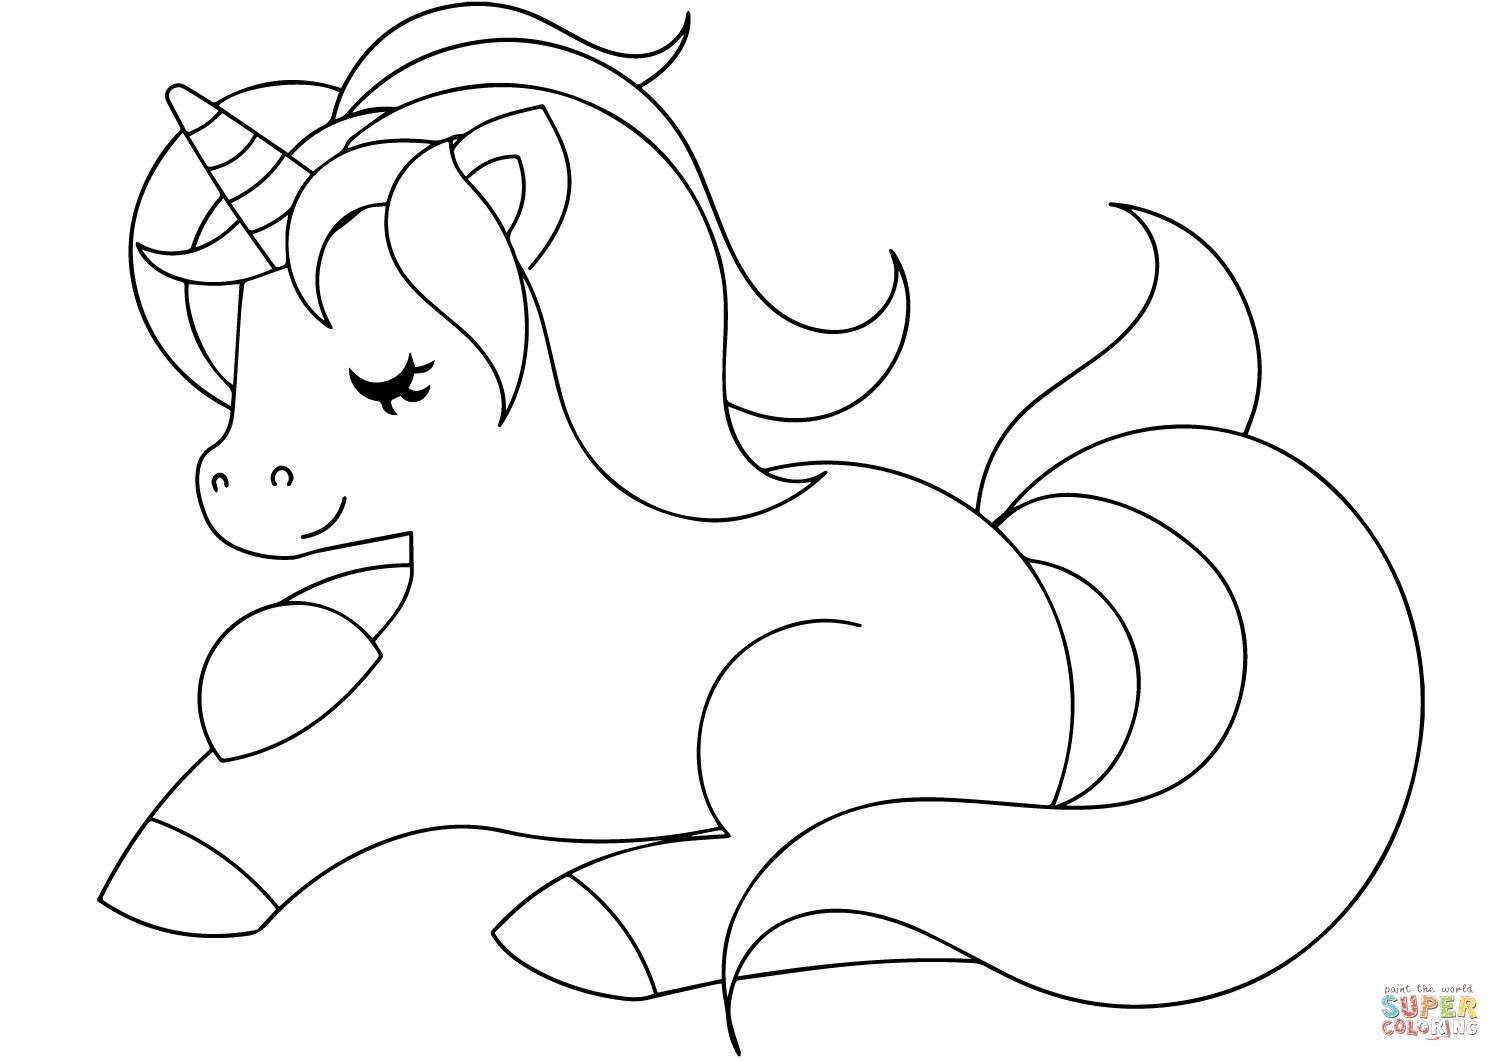 Unicorn Coloring Pages For Kids
 Cute Unicorn Coloring Page